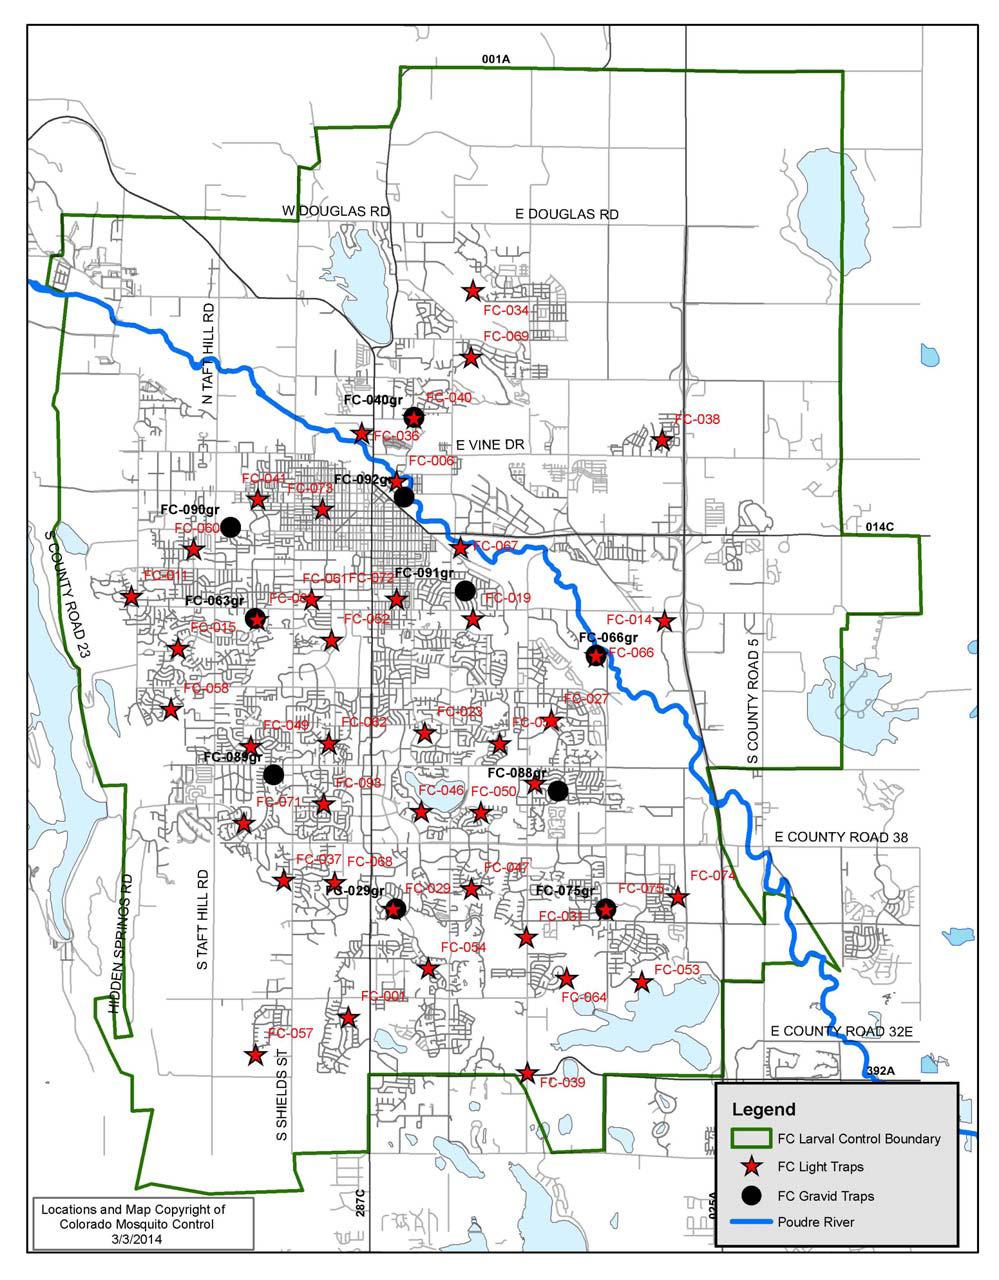 Due to budget cutbacks associated with West Nile virus surveillance in recent years, the CDPHE does not have the ability to test mosquitoes from across the state.